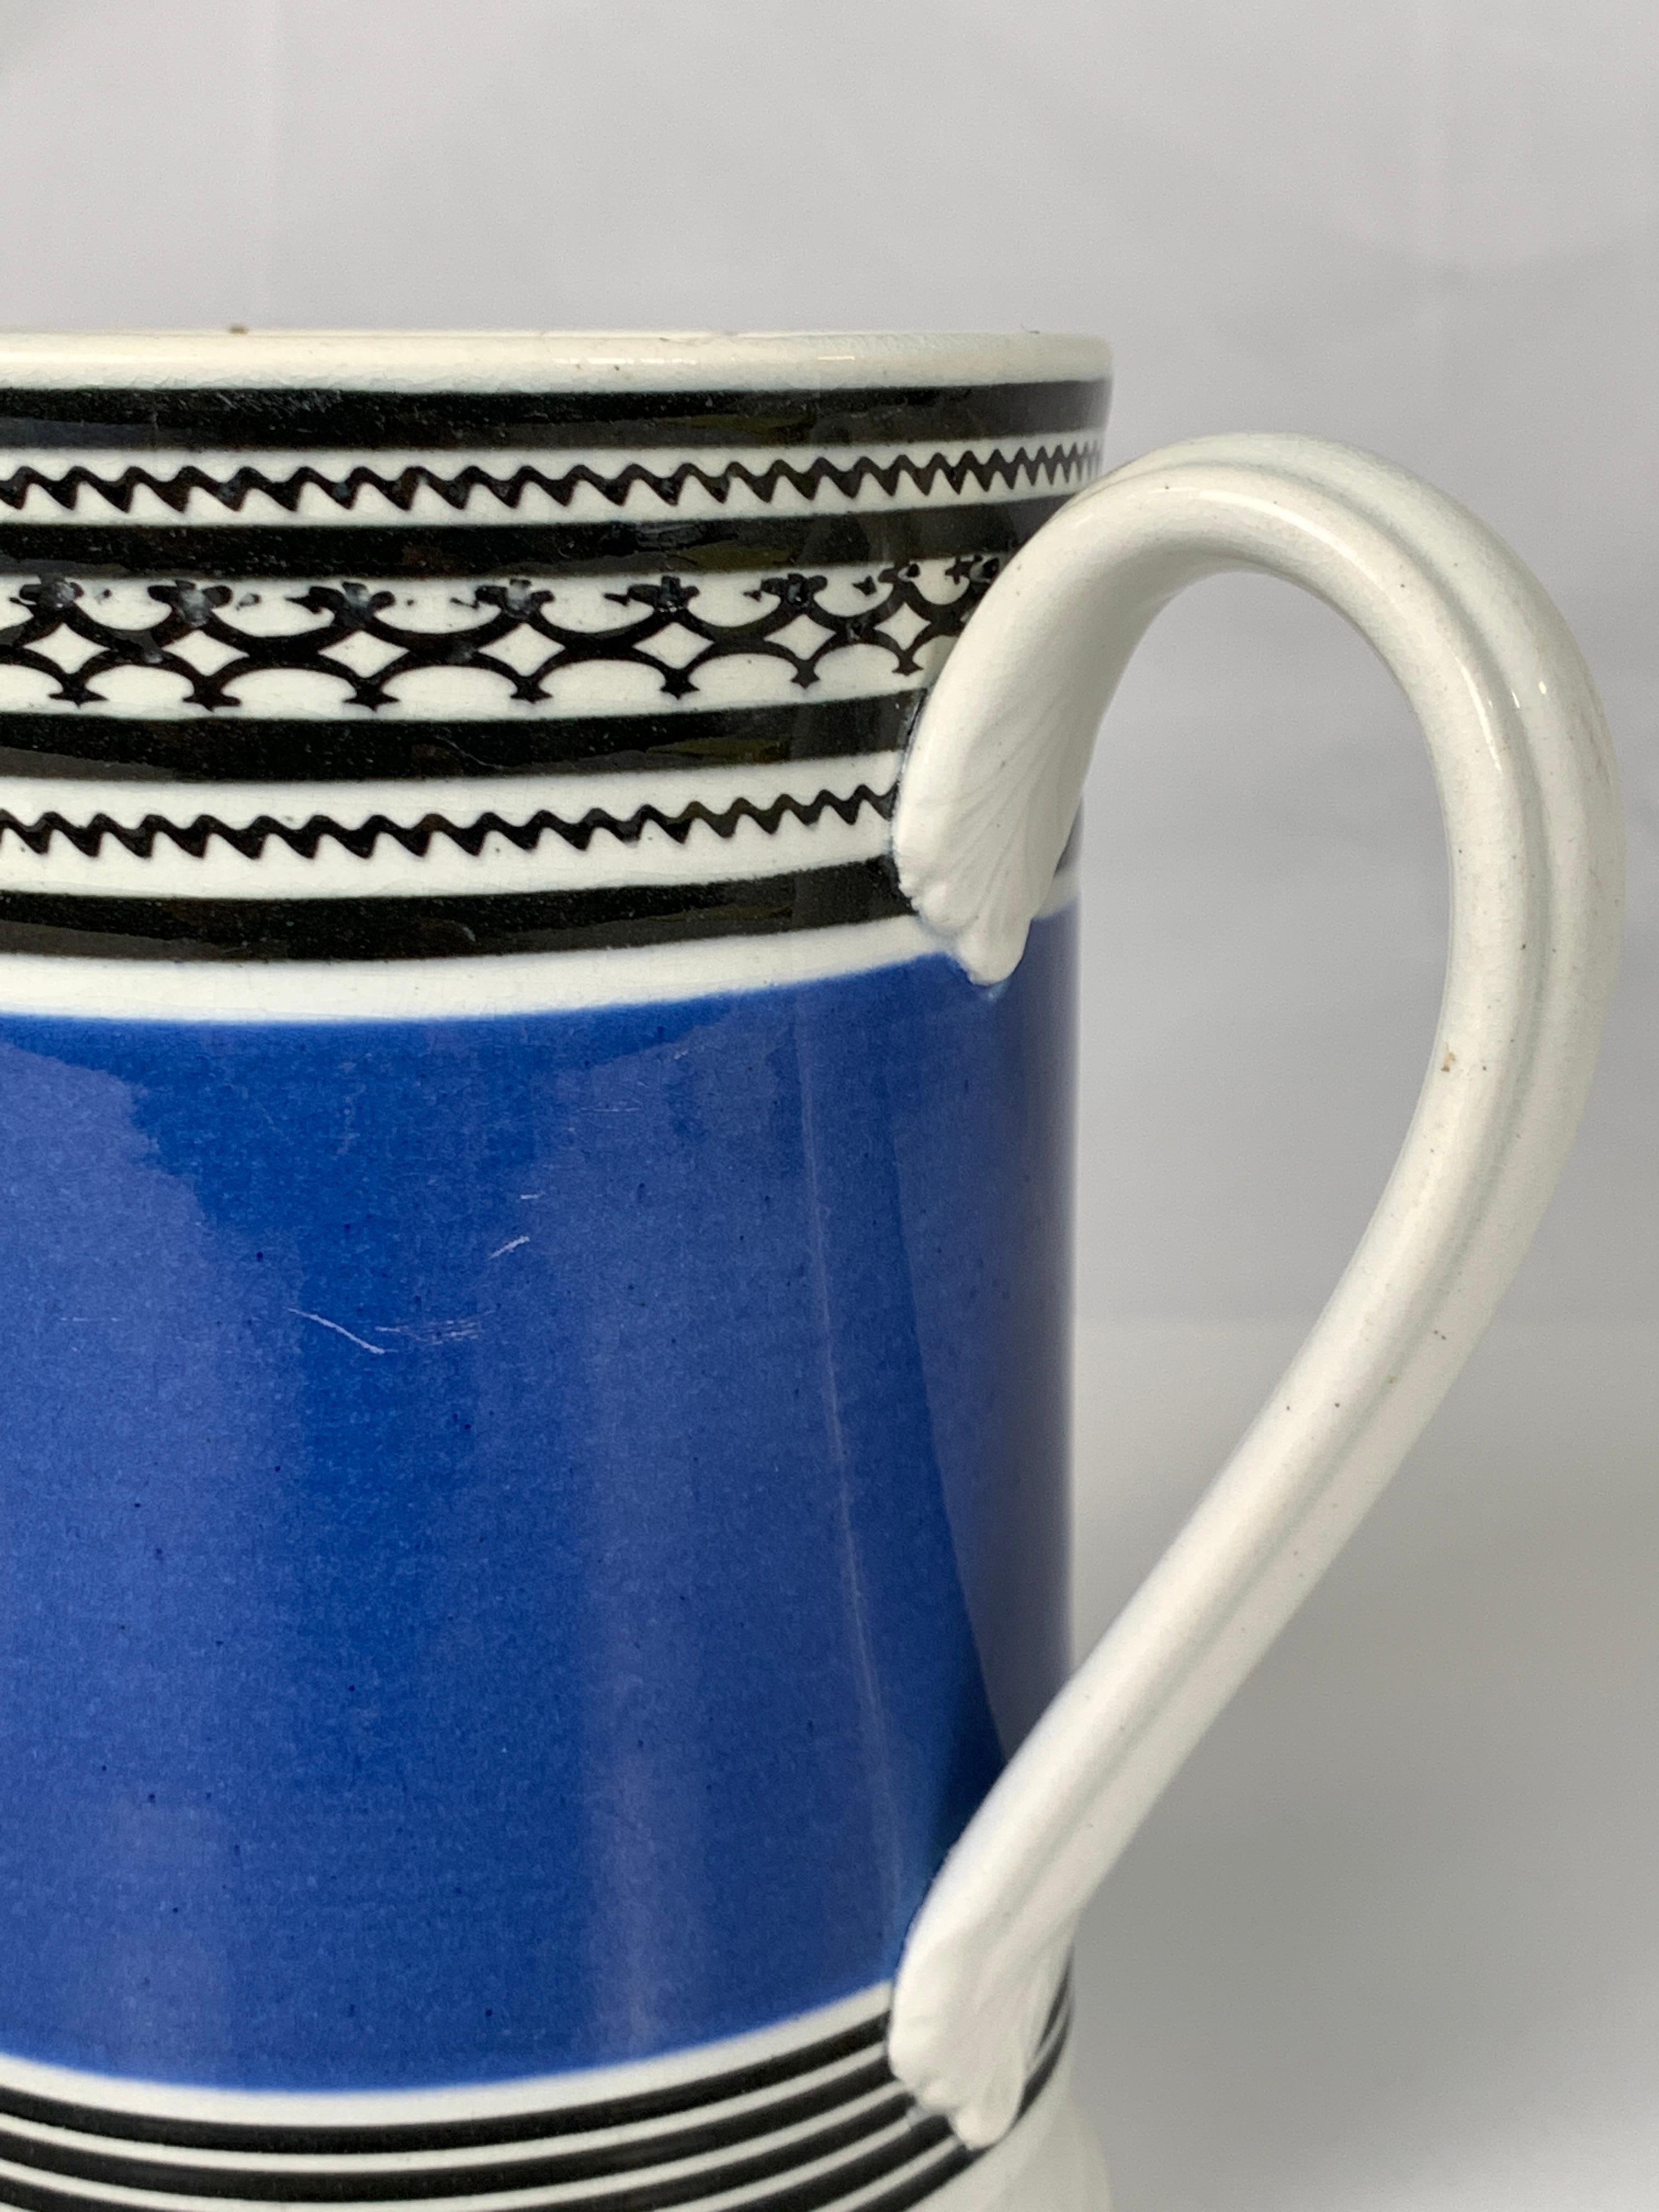 This English mochaware mug is decorated with a wide band of deep royal blue. Above and below the blue are thin black bands, several of which have geometric designs. The body of the mug is pearled creamware which dates the piece to circa 1820.
The